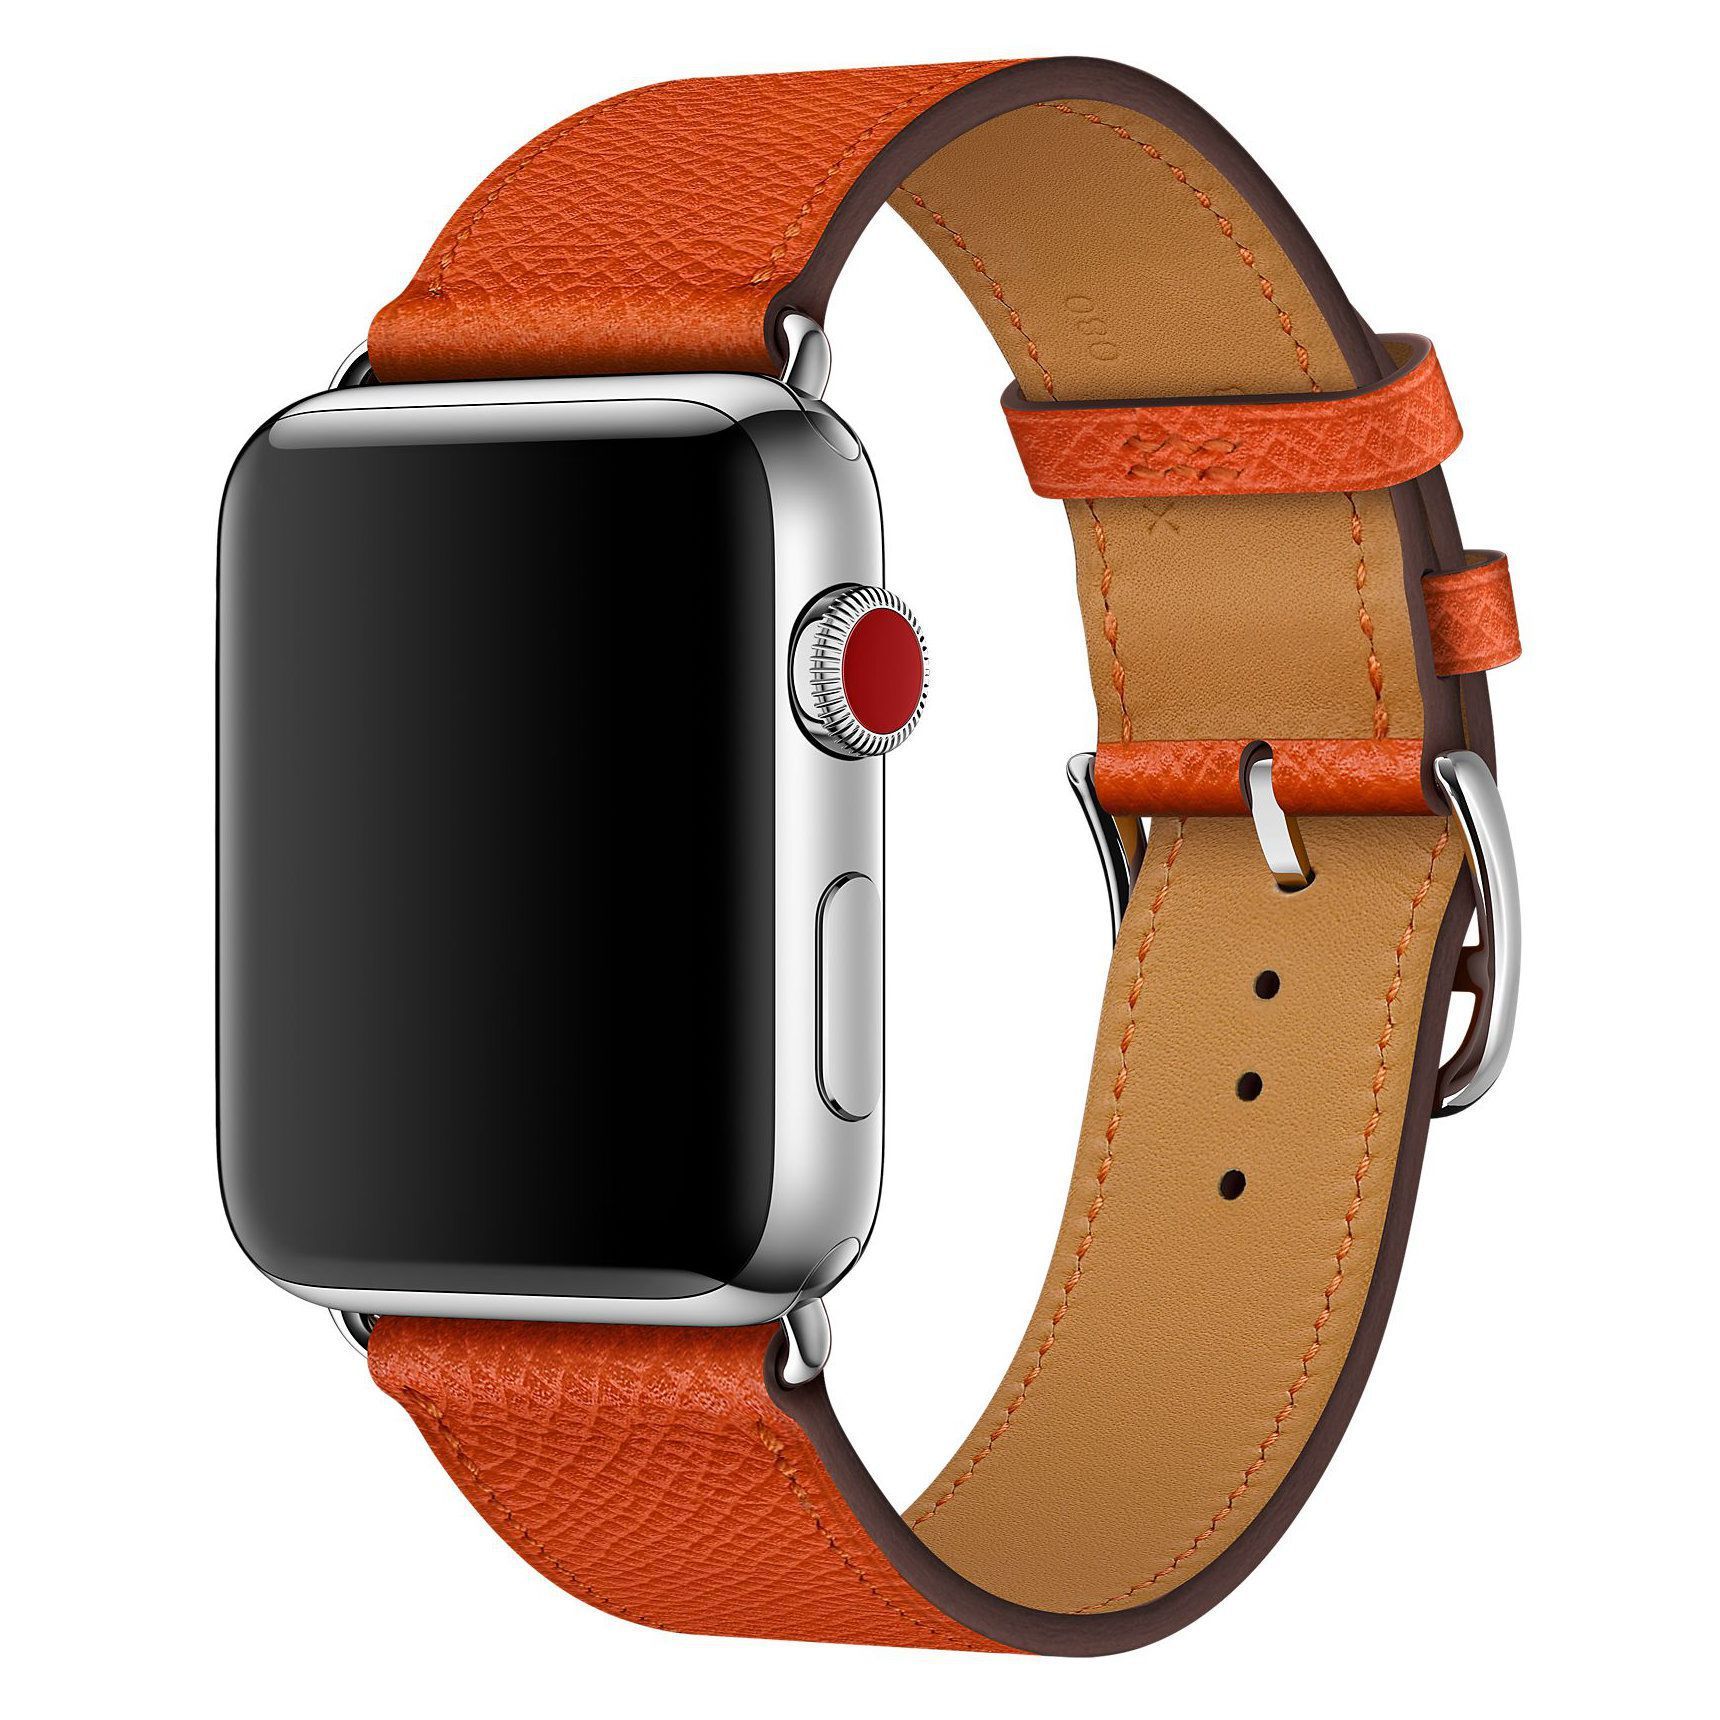 List 90+ Pictures Images Of Apple Watch Latest